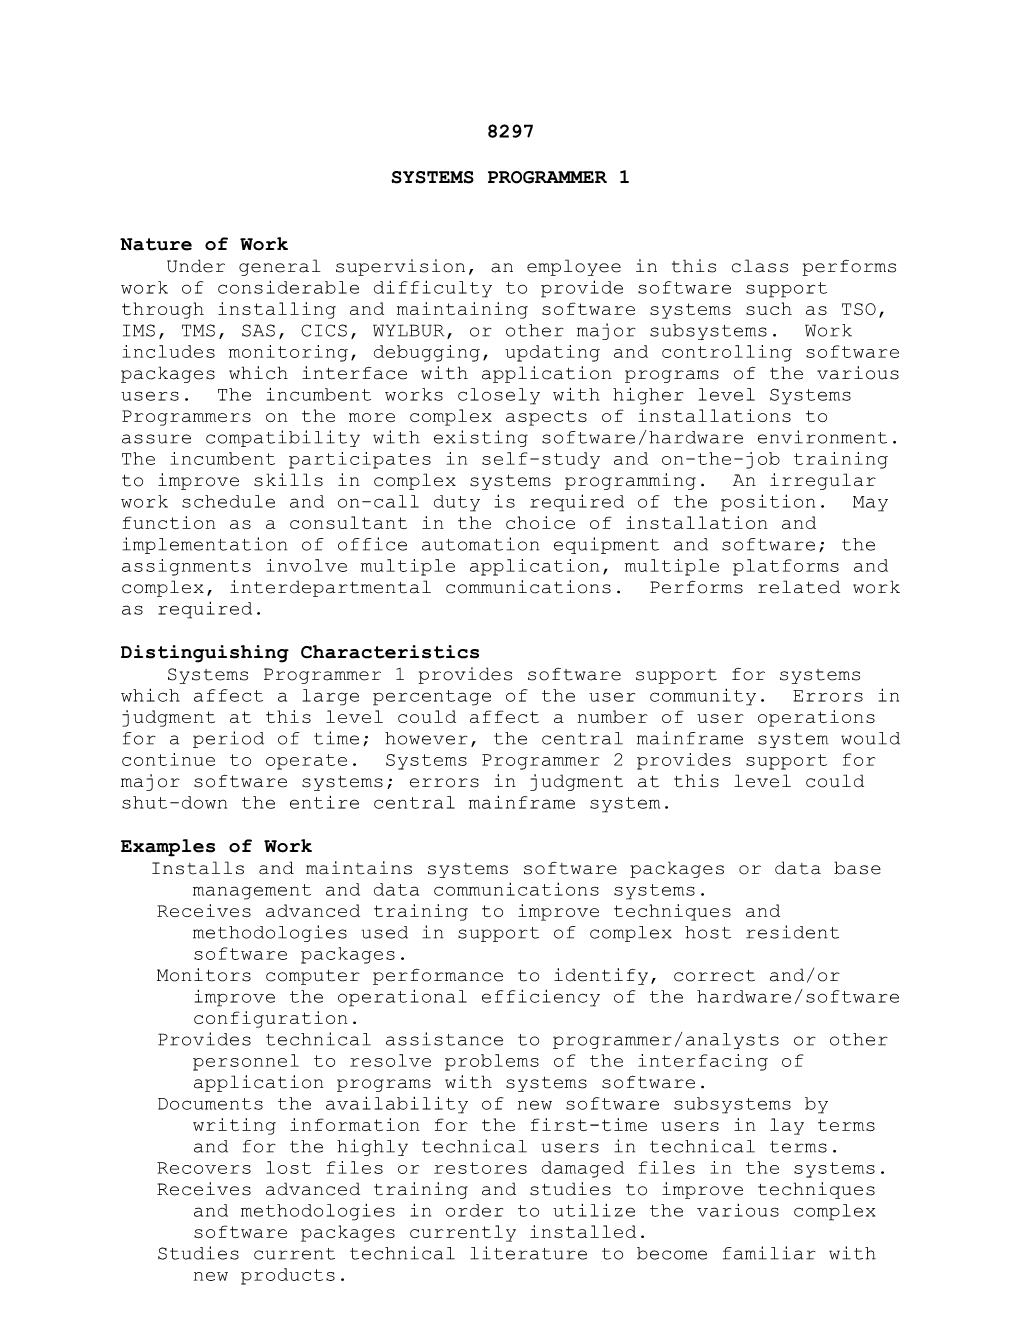 8297 SYSTEMS PROGRAMMER 1 Nature of Work Under General